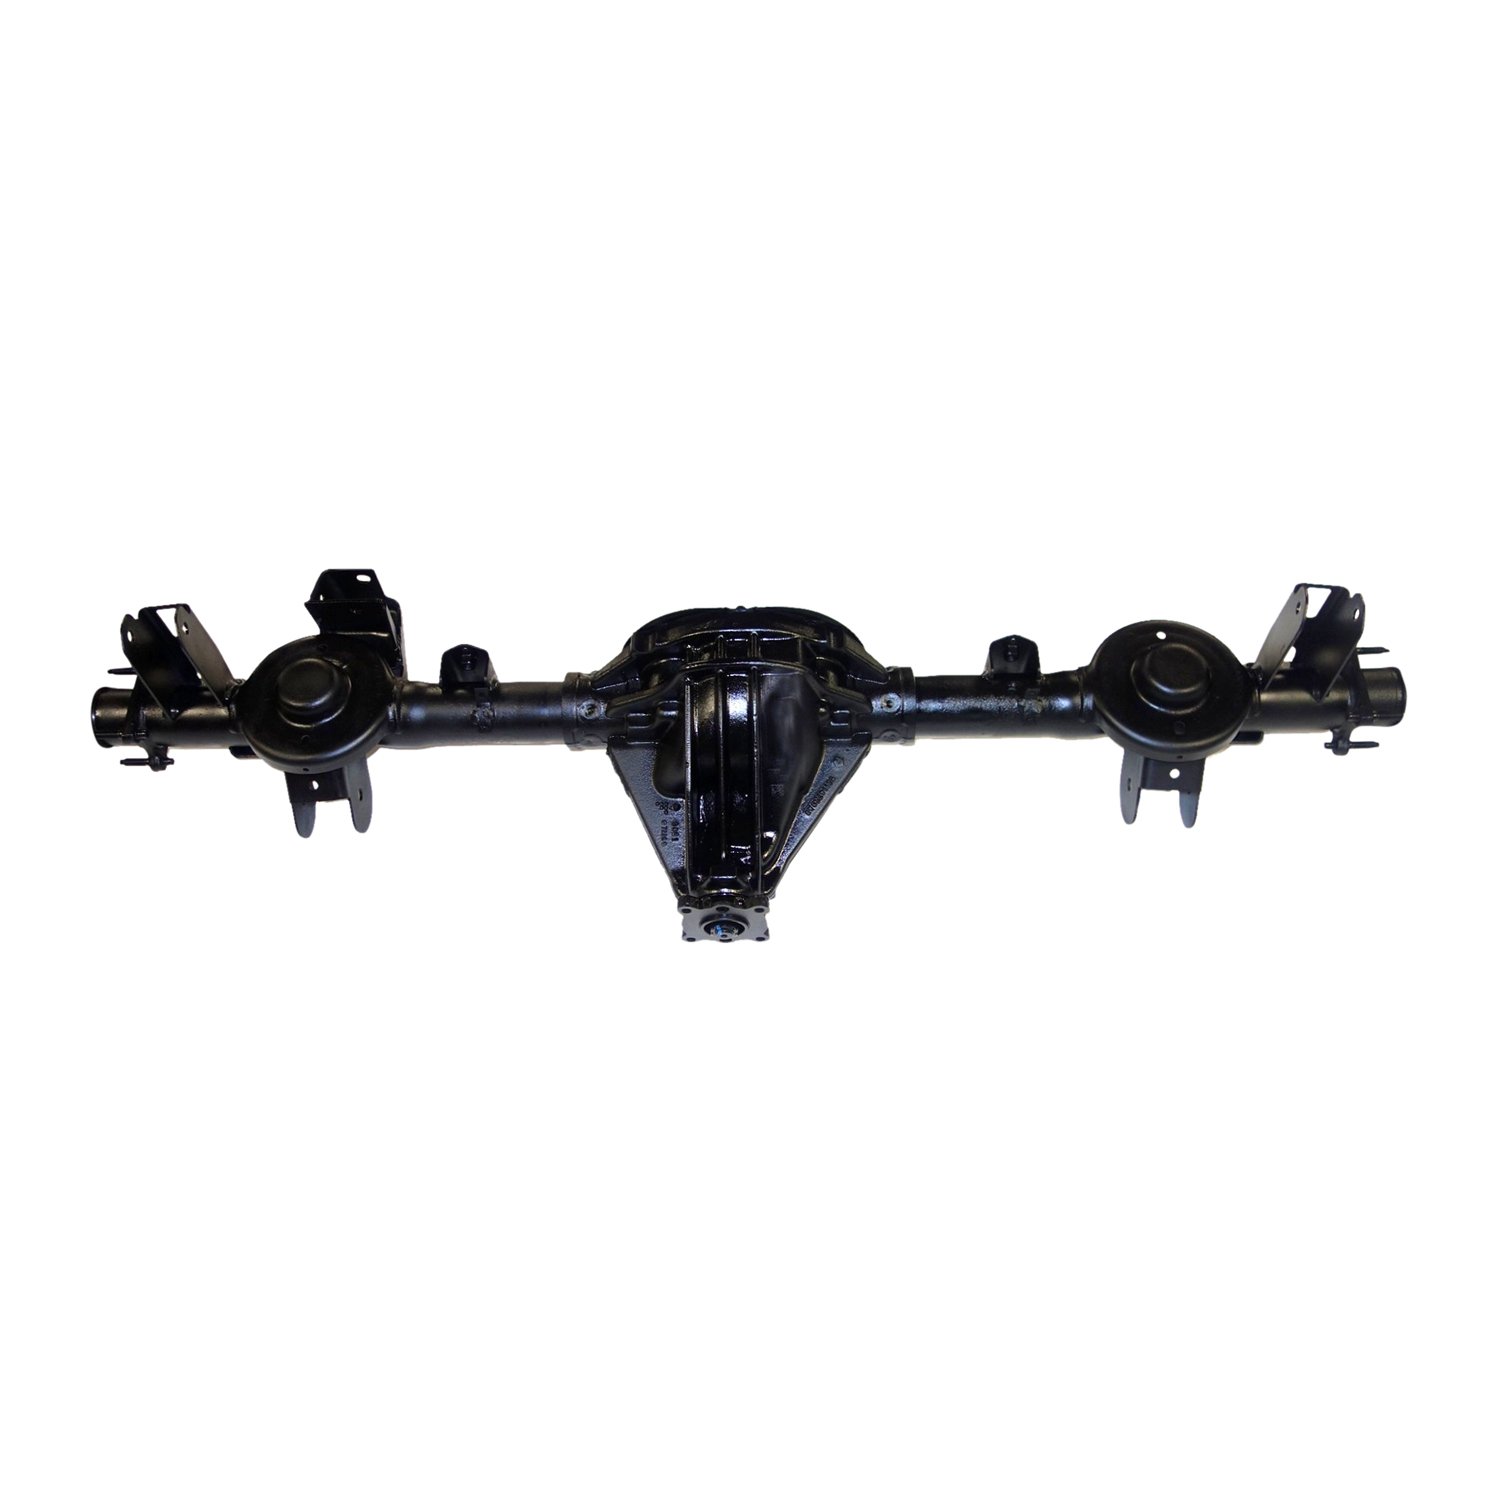 Remanufactured Axle Assy for Chy 8.25" 07-10 Comm&er, Grand Cherokee 3.55 Posi LSD